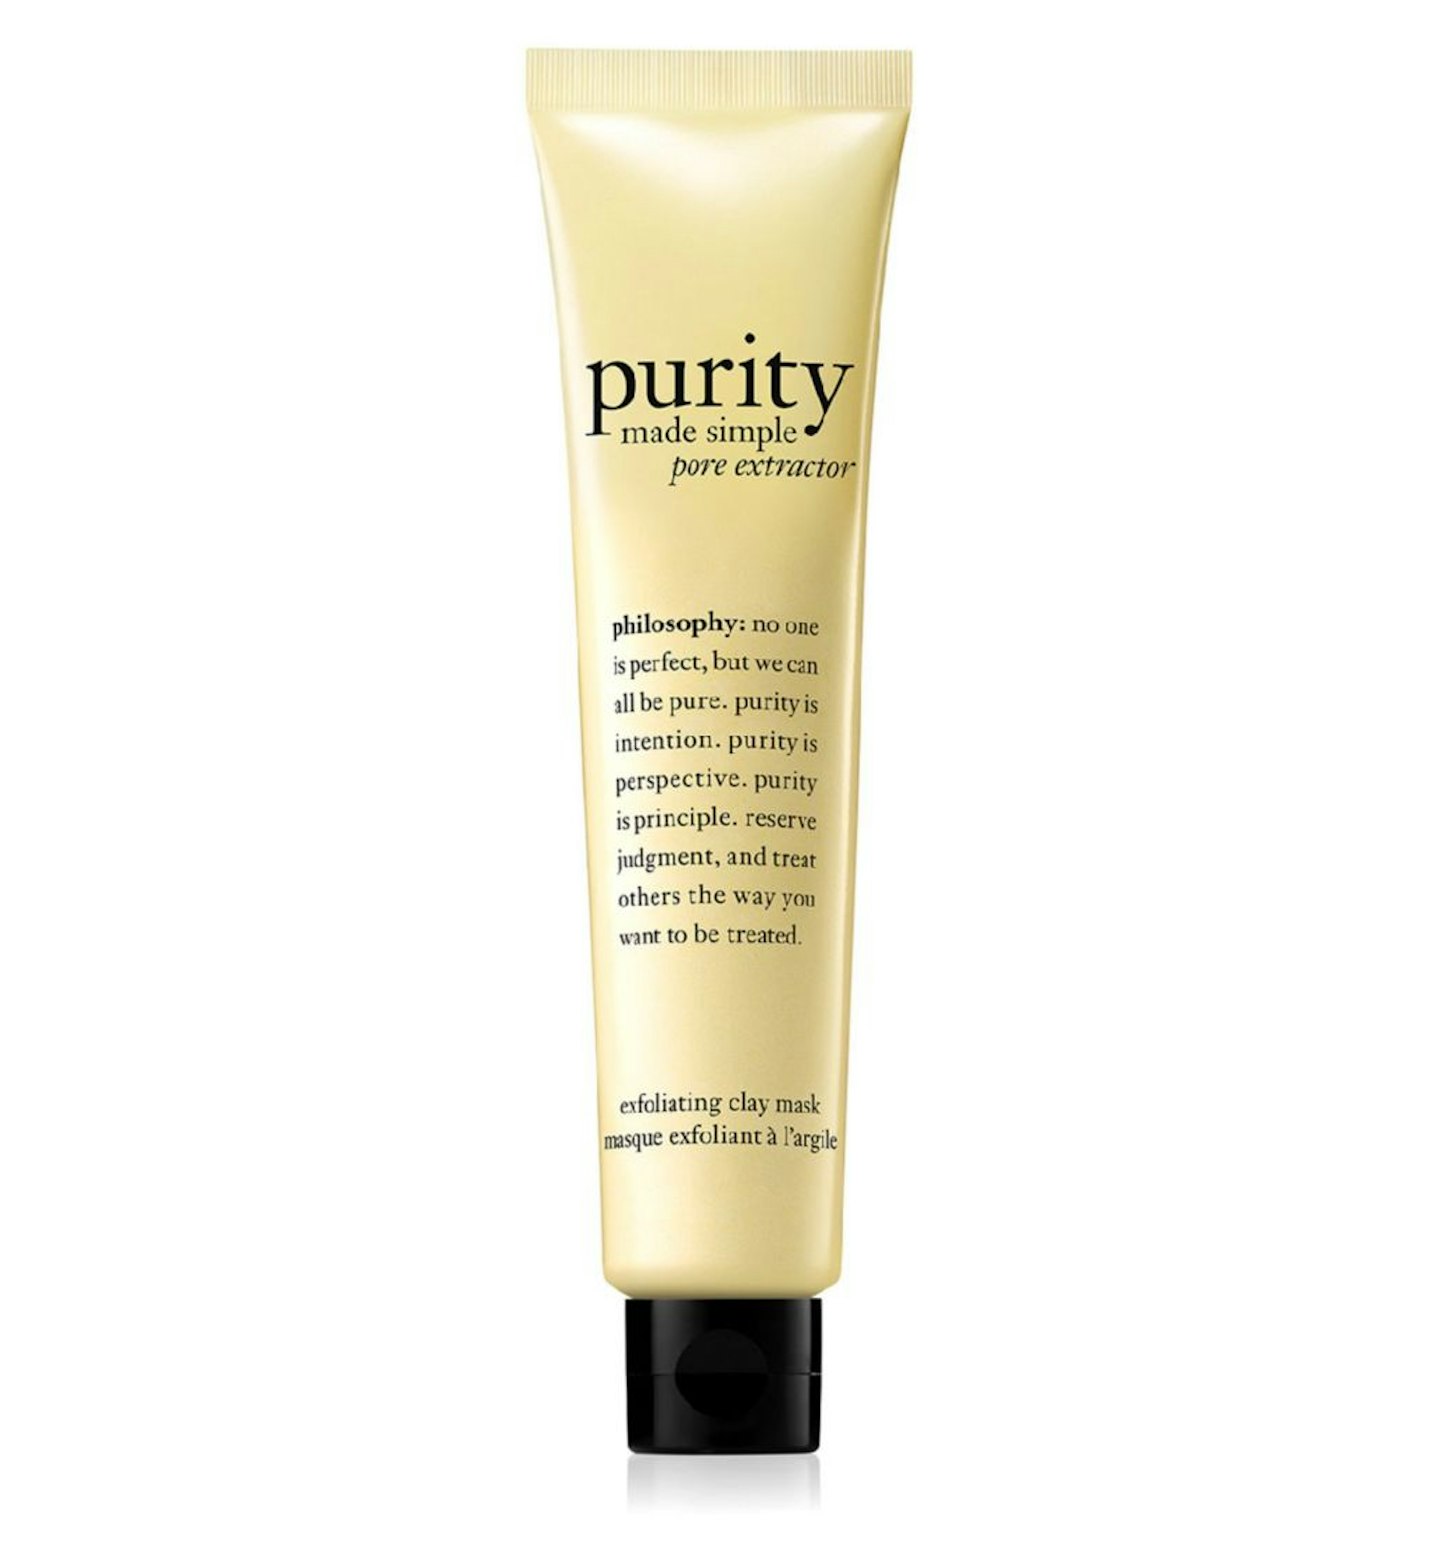 Best for unclogging pores: Philosophy Purity Made Simple Pore Extractor Exfoliating Clay Mask